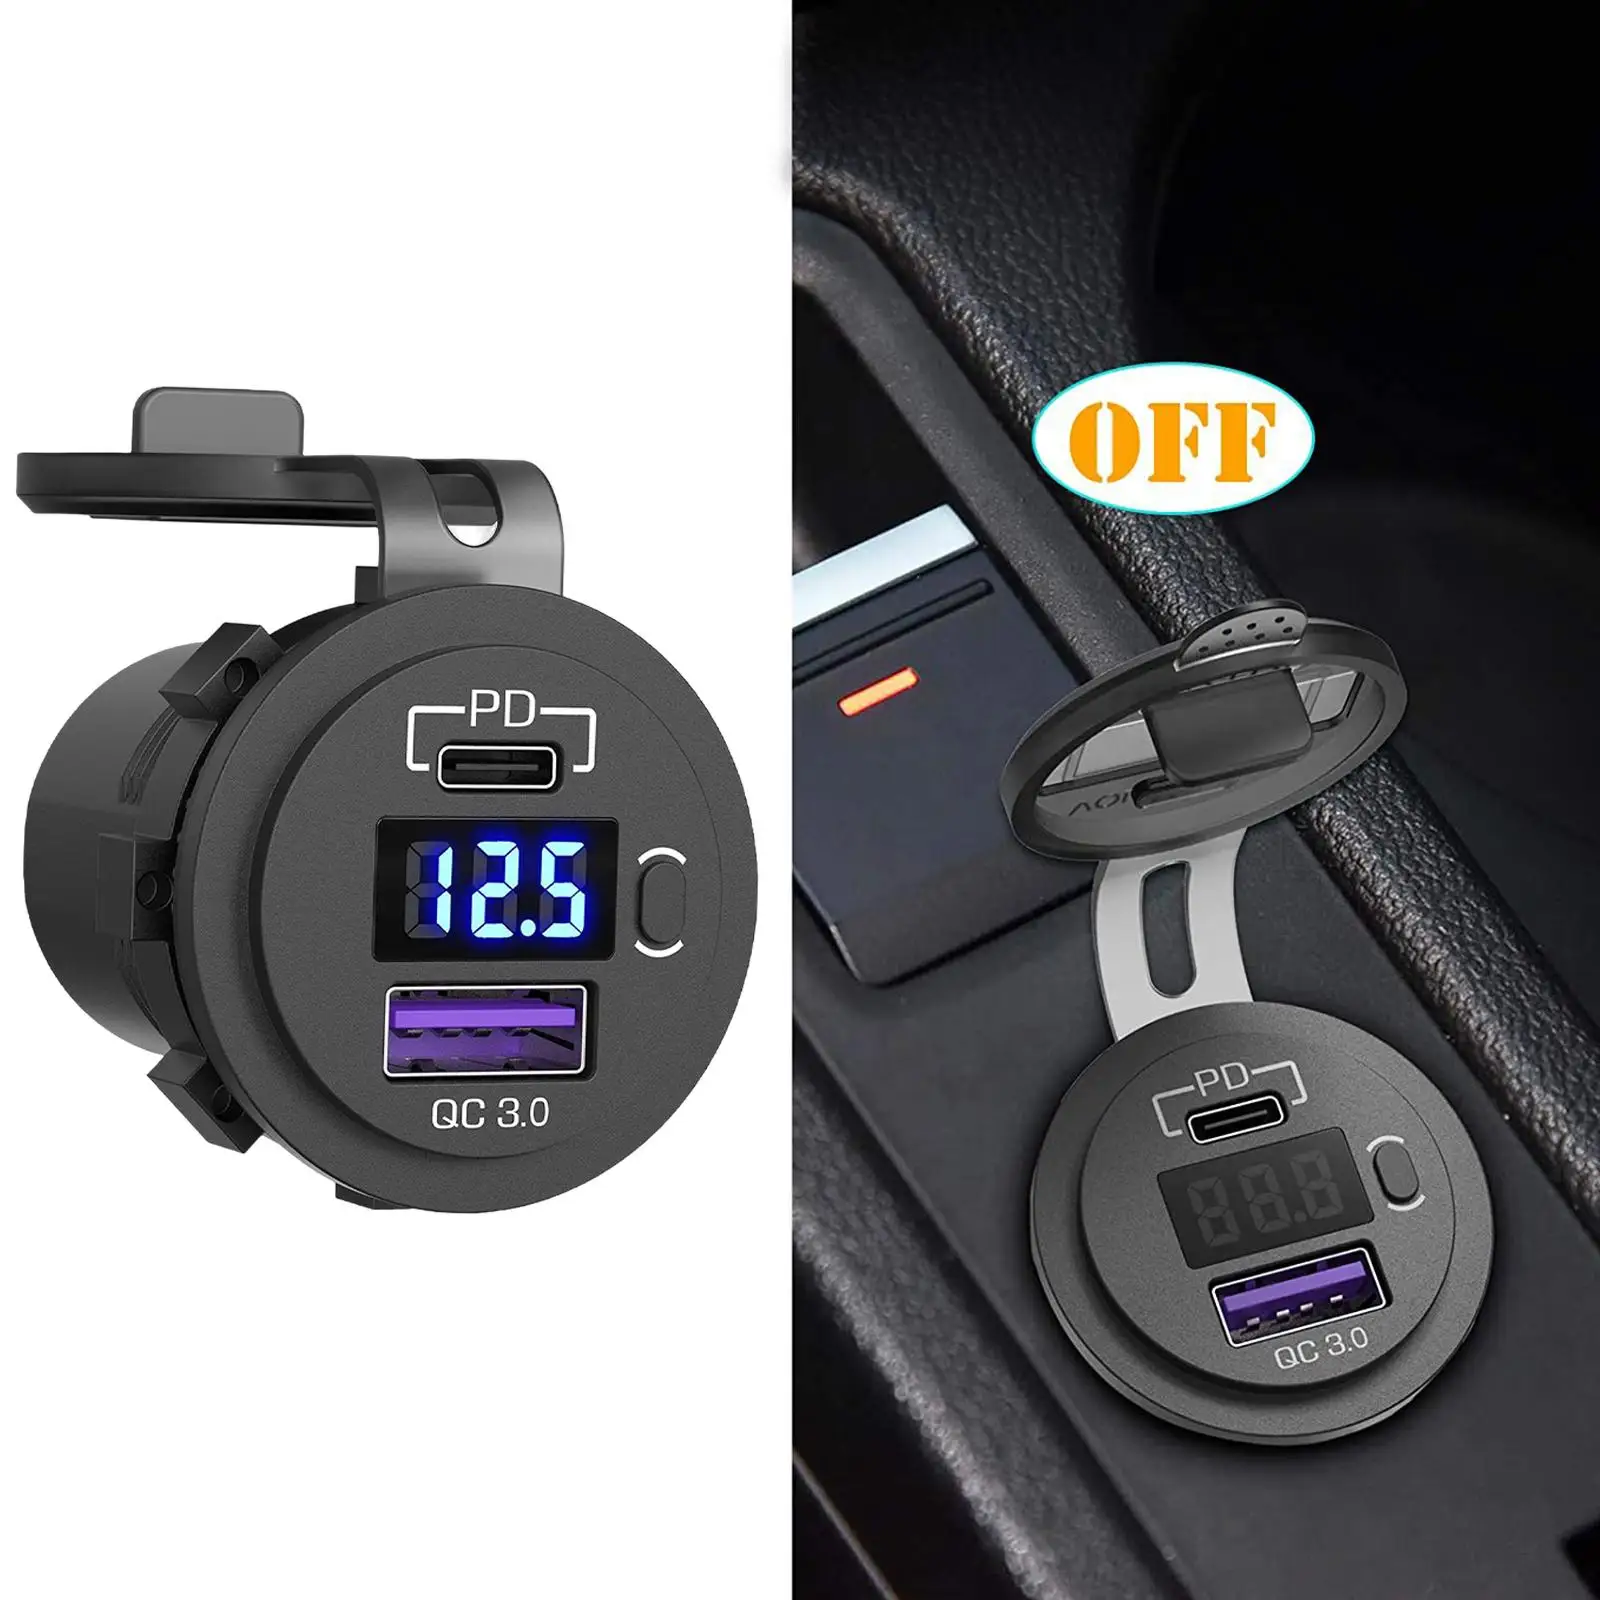 USB C Car Charger 33W PD & QC3.0 12V/24V 10A Fuse SUV RV Van Truck Power Outlet Quick Charge Phone Charger with Voltage Display